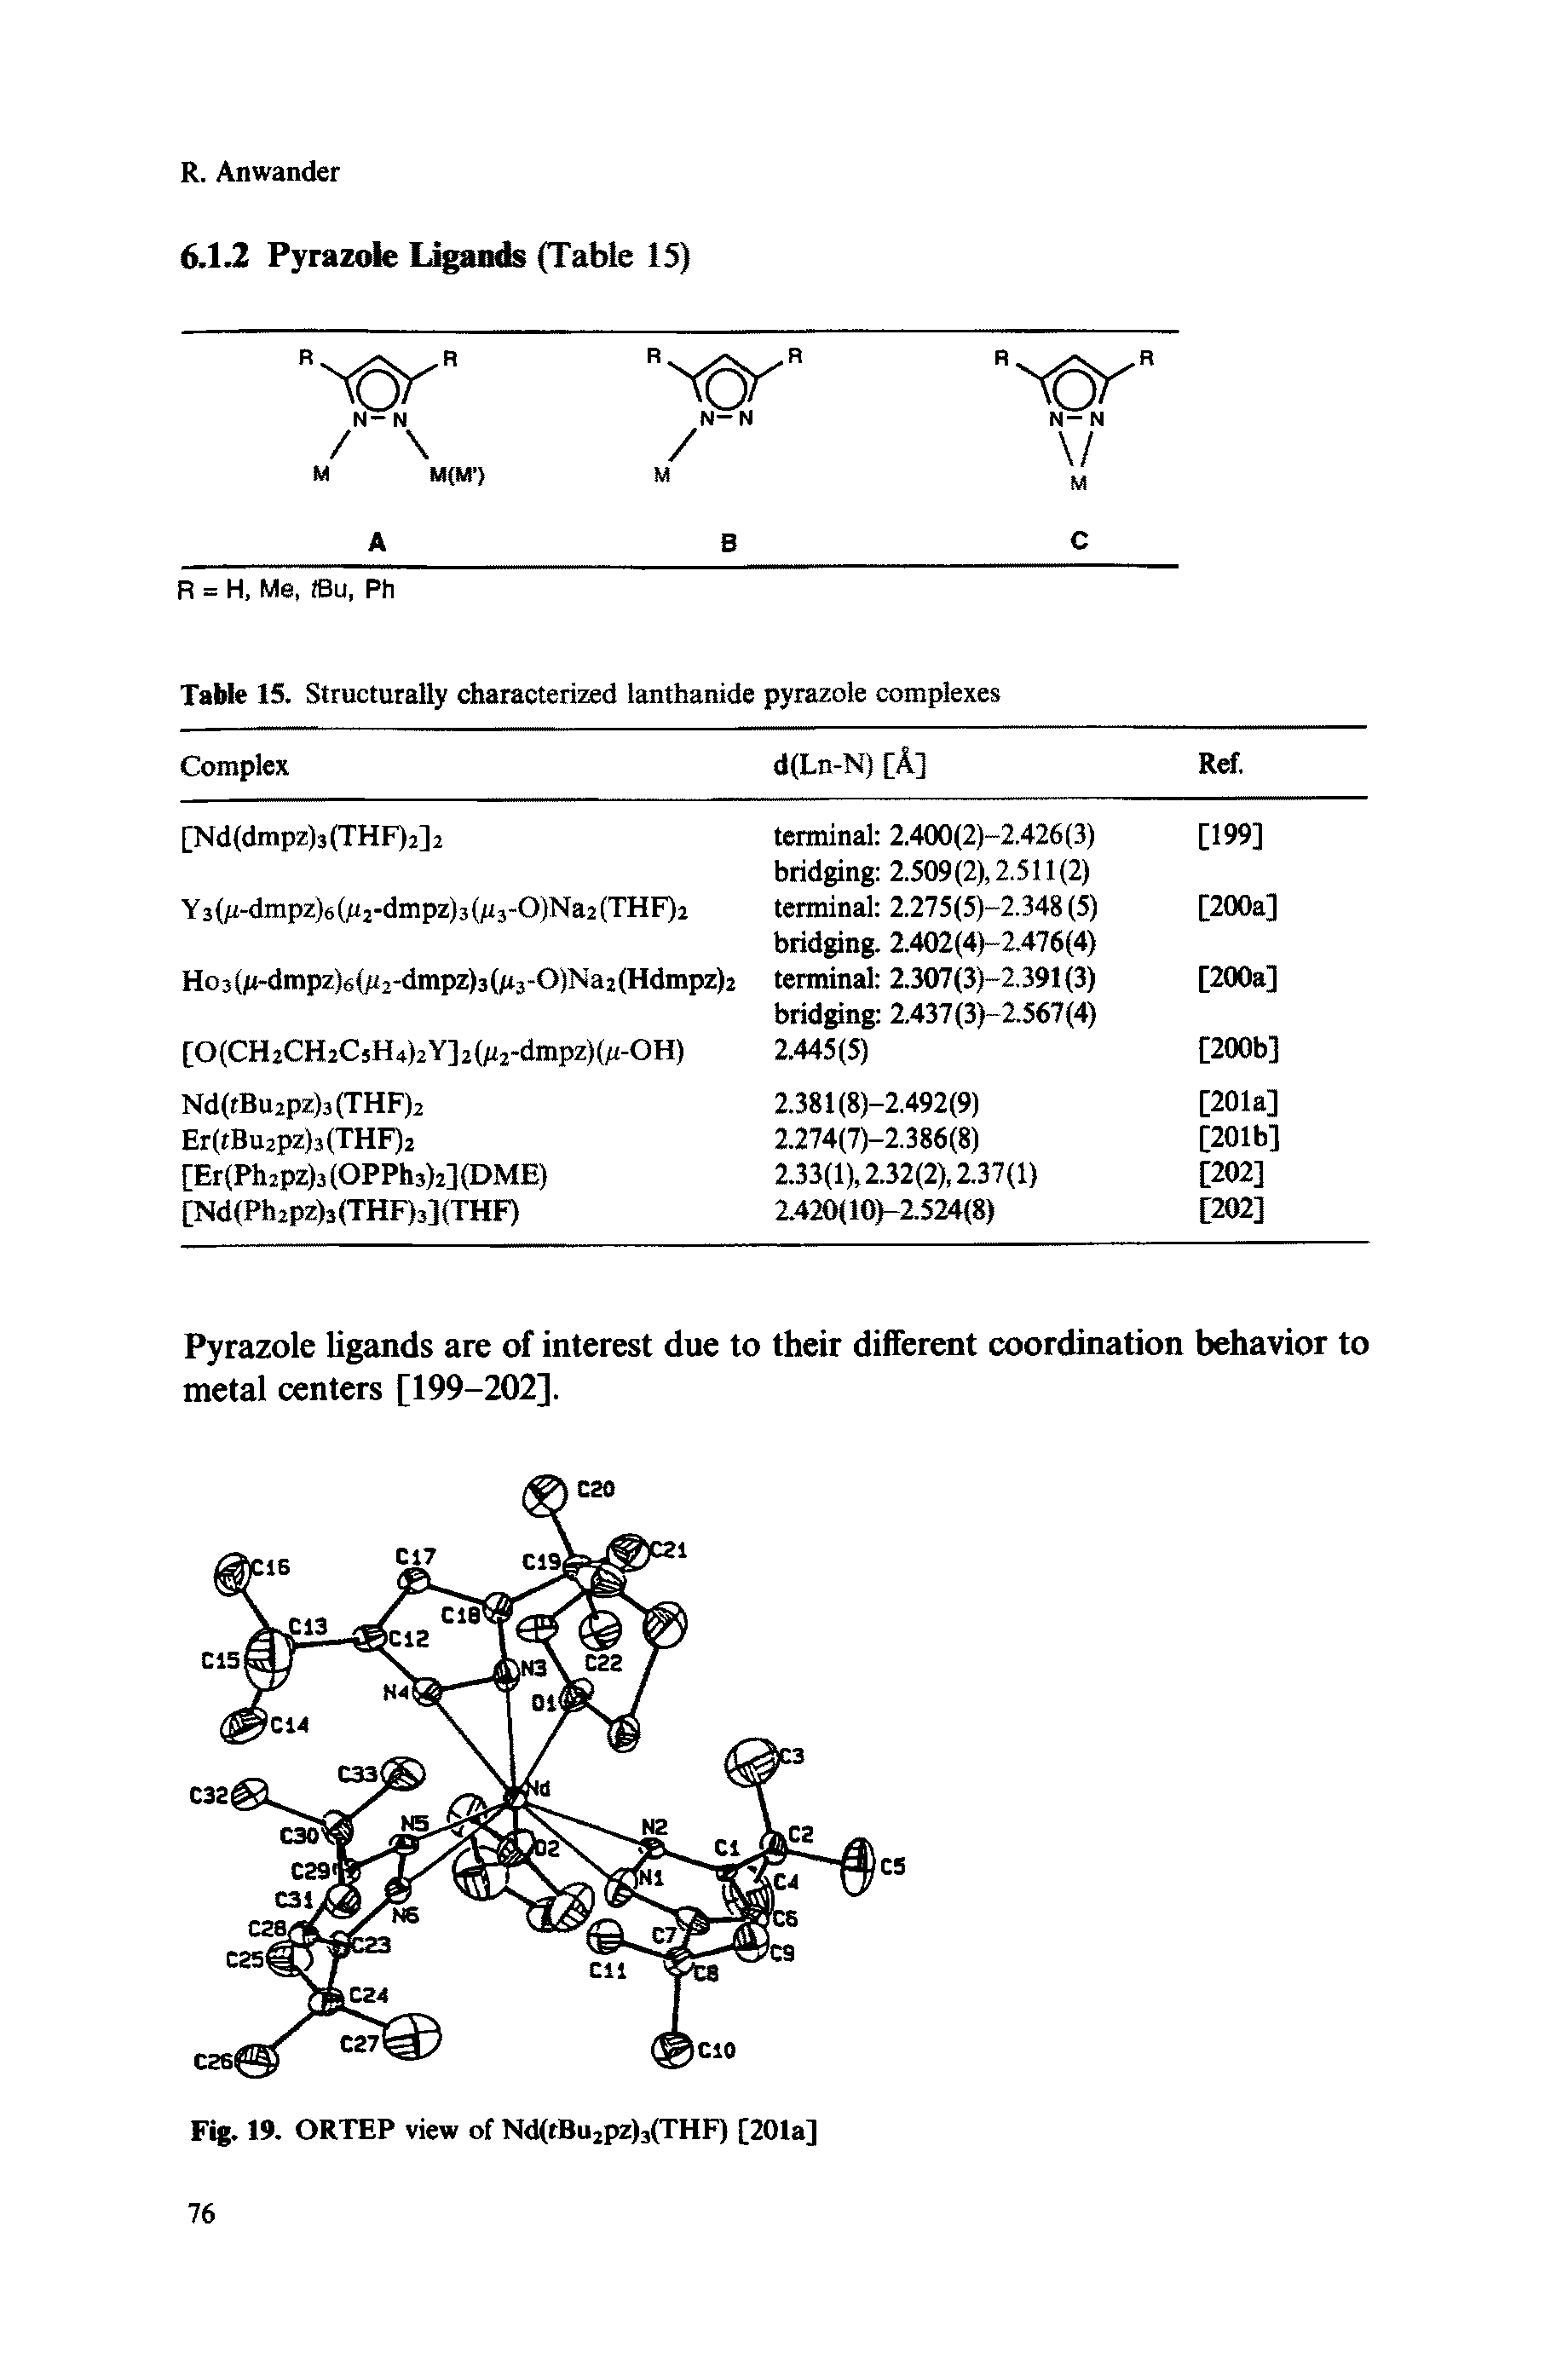 Table 15. Structurally characterized lanthanide pyrazole complexes...